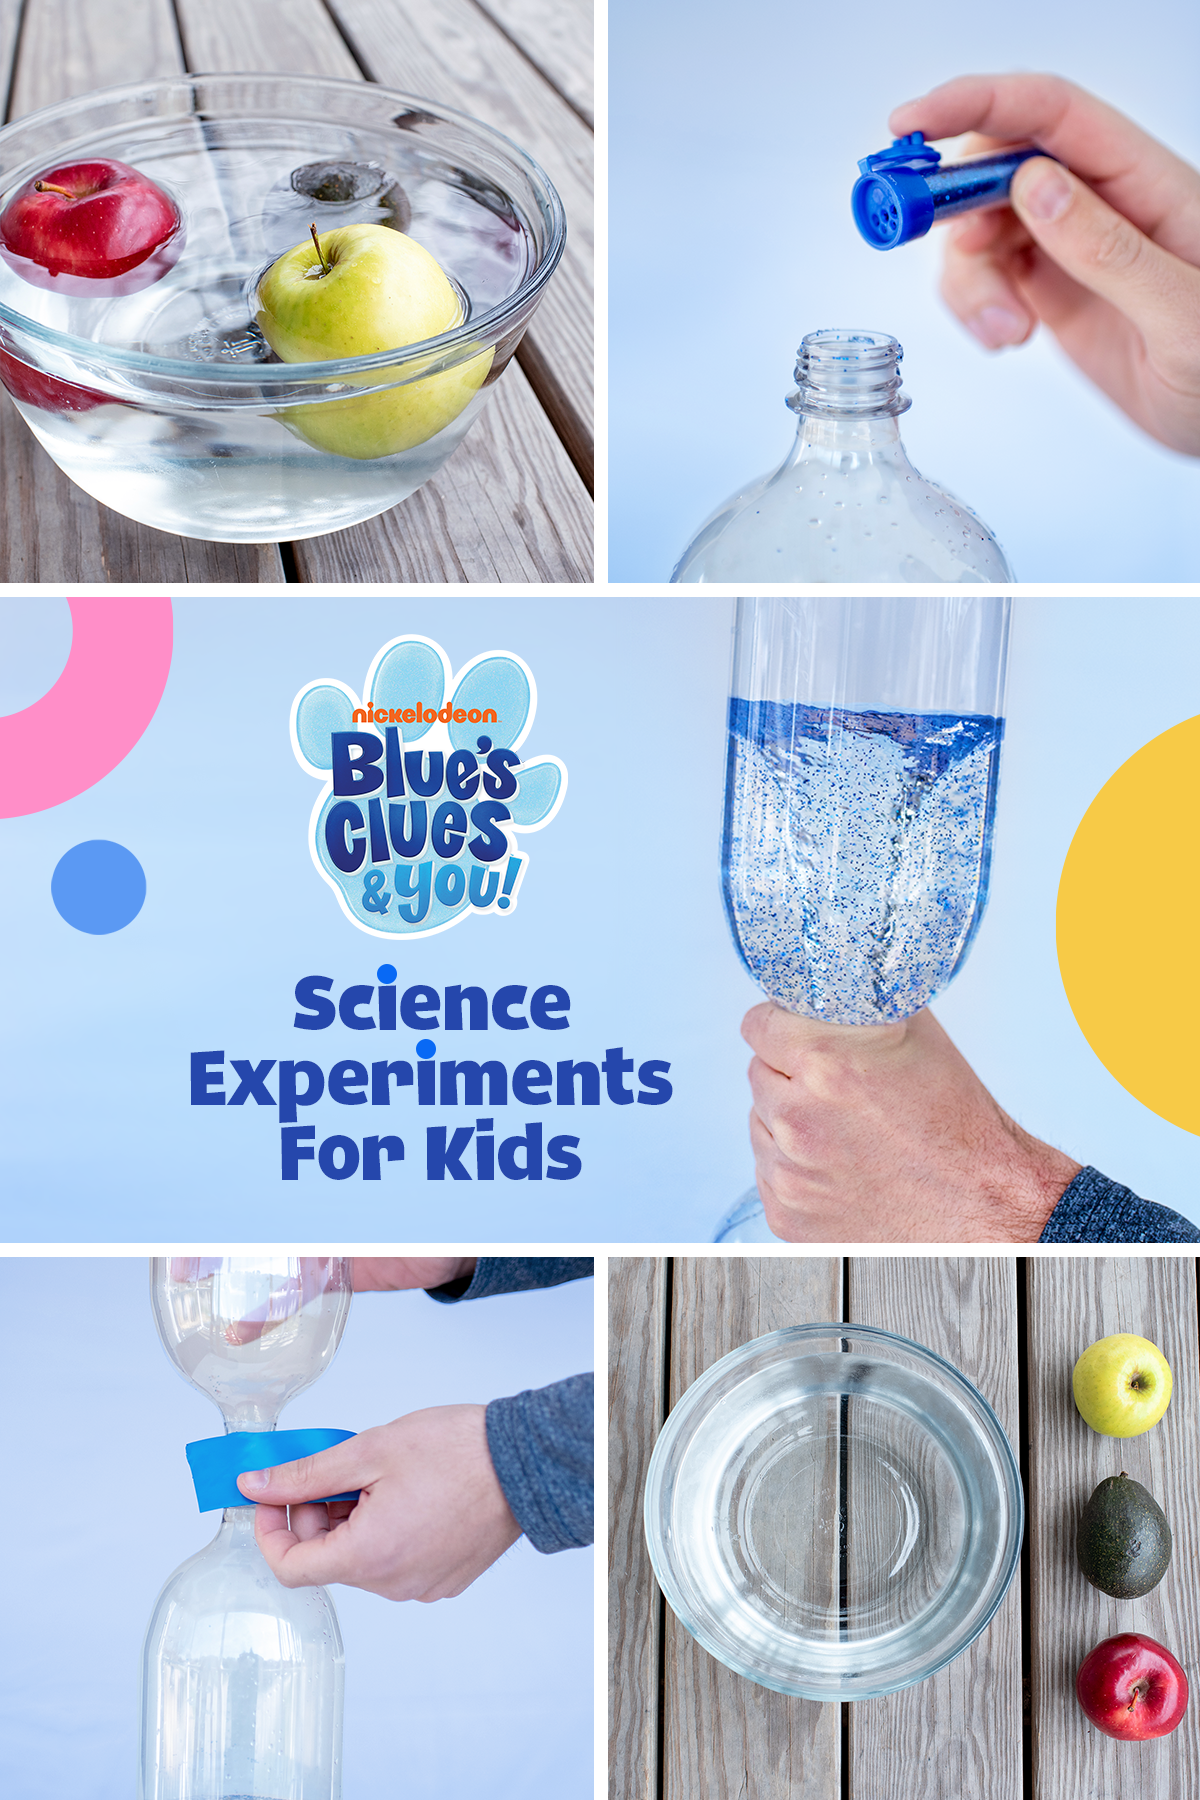 Blue's Clues Science Experiments For Kids